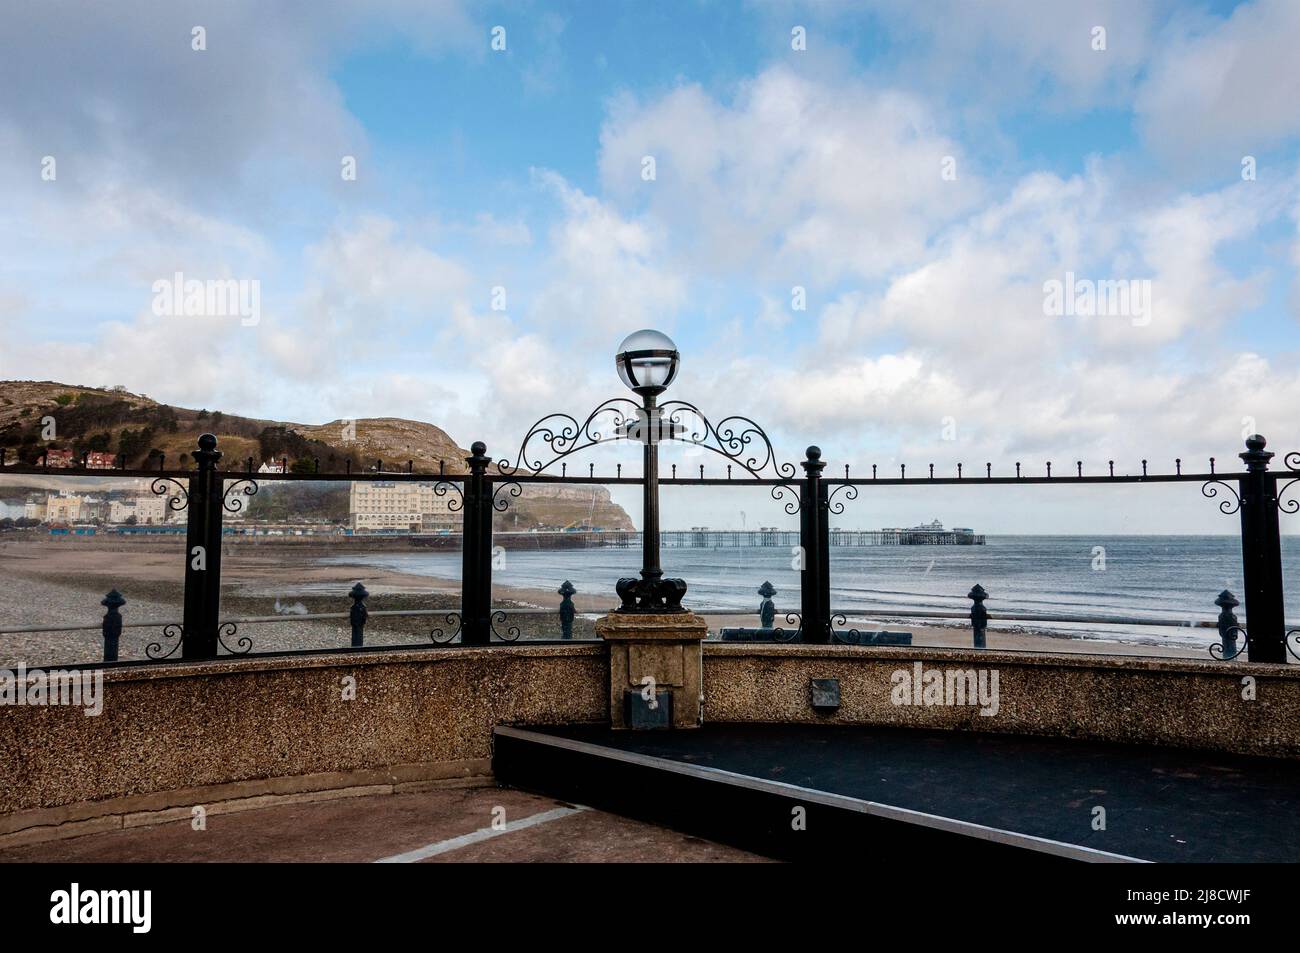 Early 20th century concrete iron and stone Llandudno bandstand with a semi circular rear wall to the podium furnished with an iron lamp on a pier Stock Photo